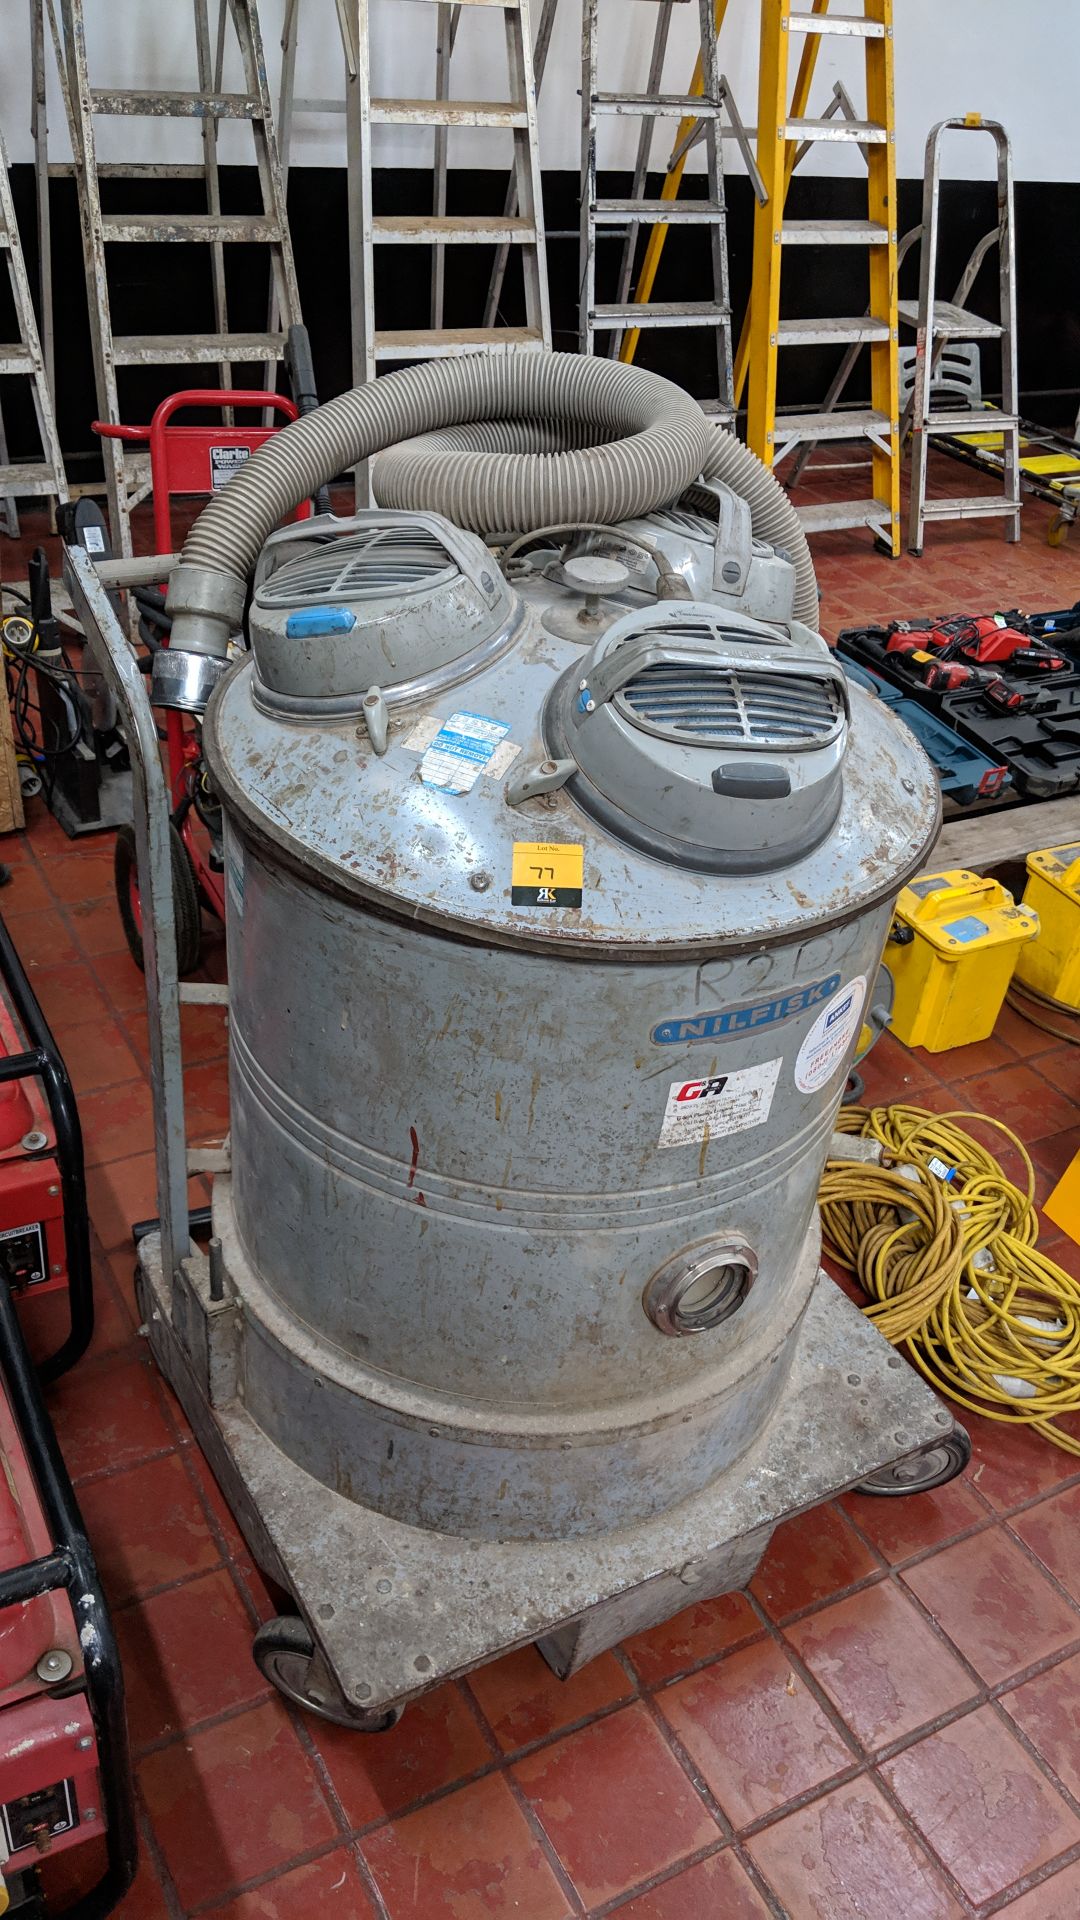 Nilfisk mobile fume extraction system This is one of a large number of lots in this sale being